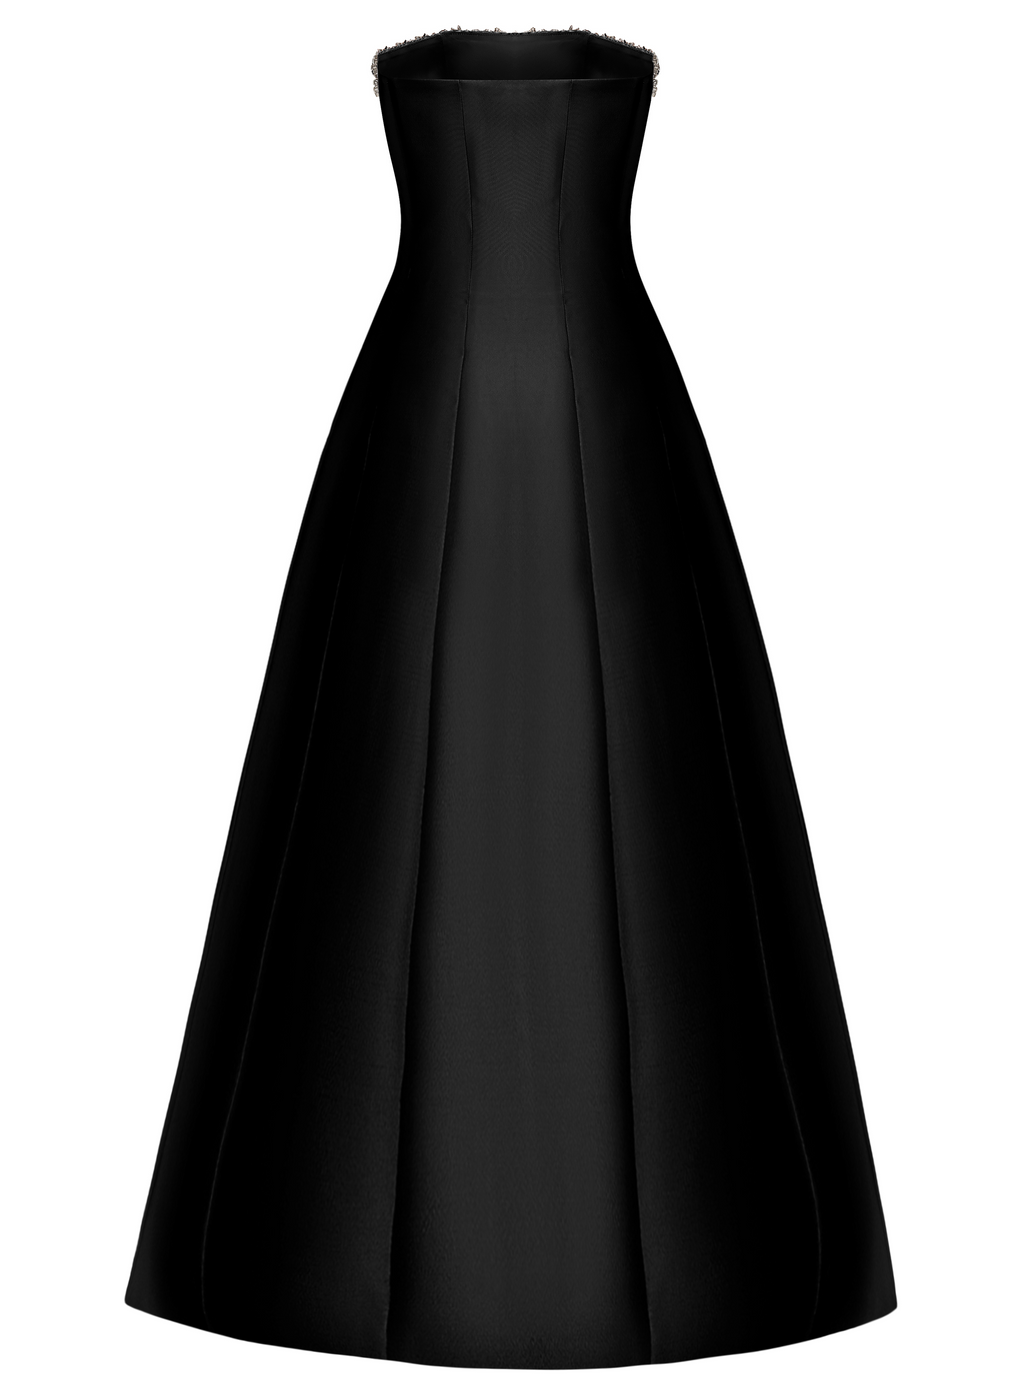 CRYSTAL-EMBELLISHED MAXI DRESS IN BLACK – NDS the label